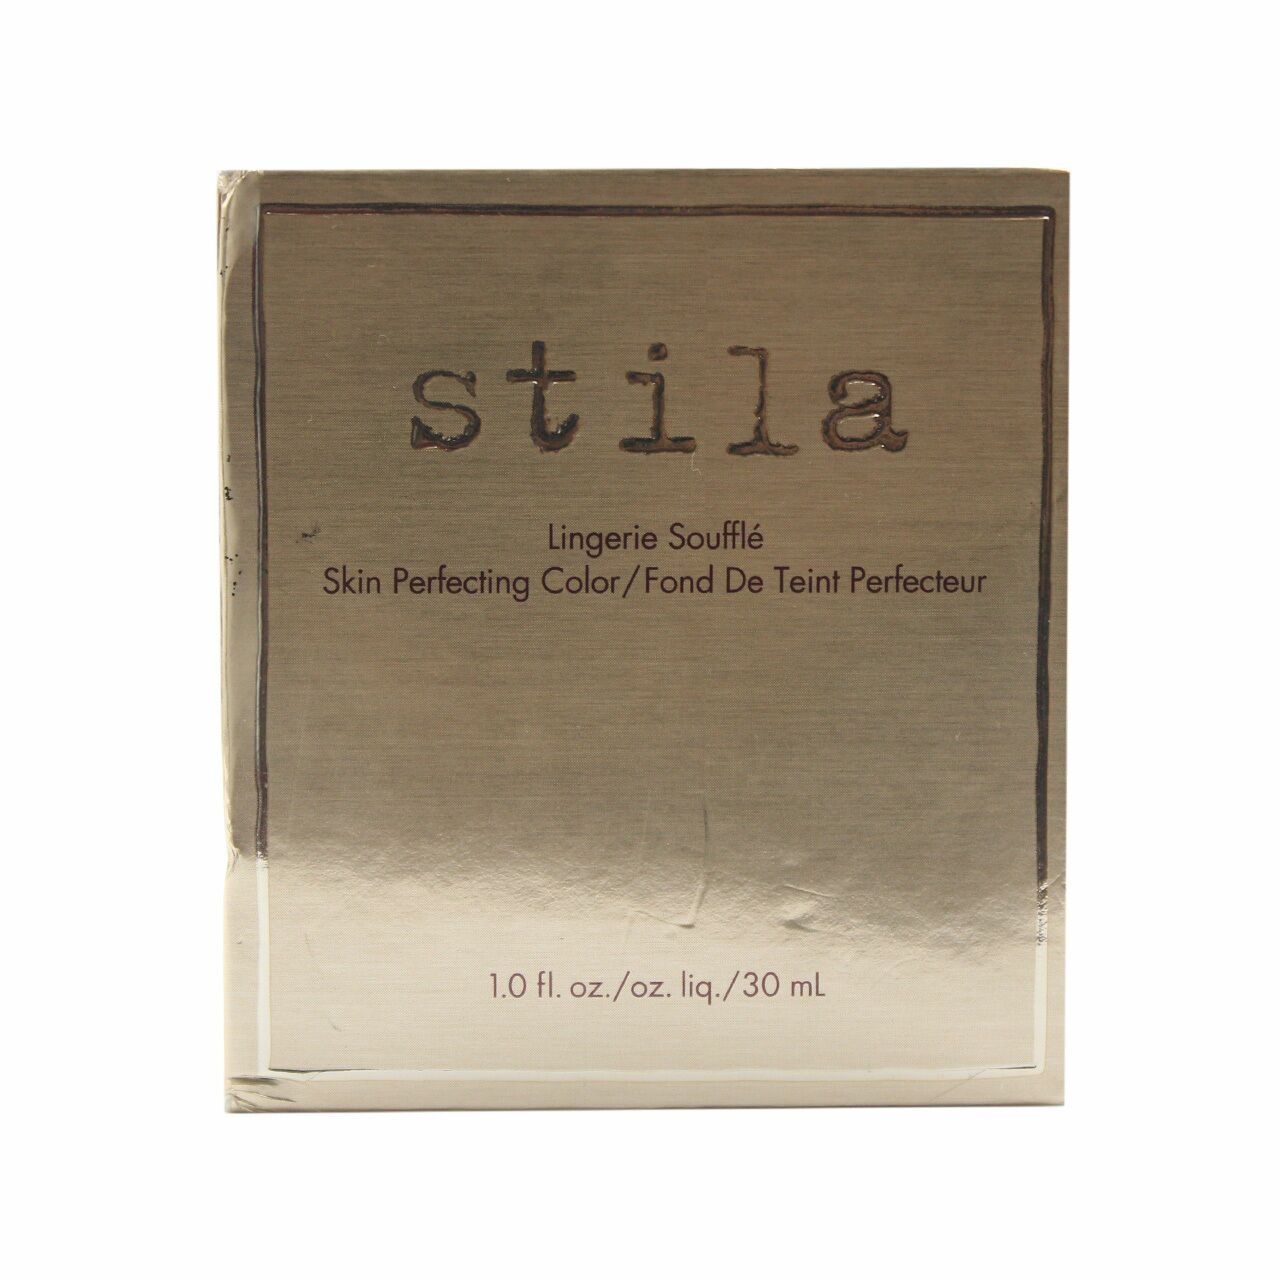 Stila Lingerie Souffle Skin Perfecting Color Foundation Shade 2.0 Faces